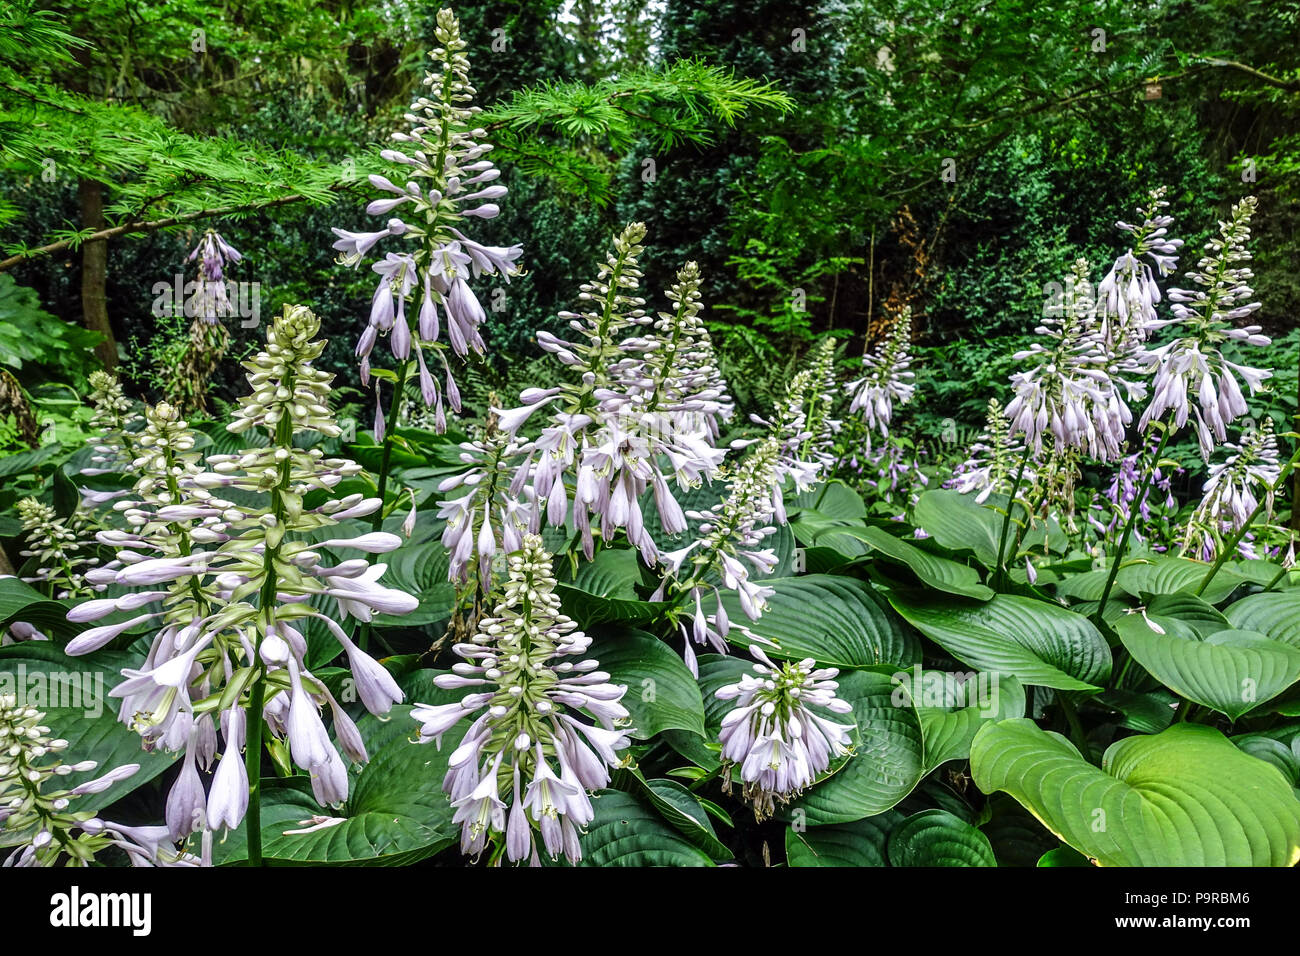 Flowering Hostas, Big leaves and robust species are suitable for the shady garden border, garden scene, the edge of a forest Hosta Blue Mammoth Stock Photo